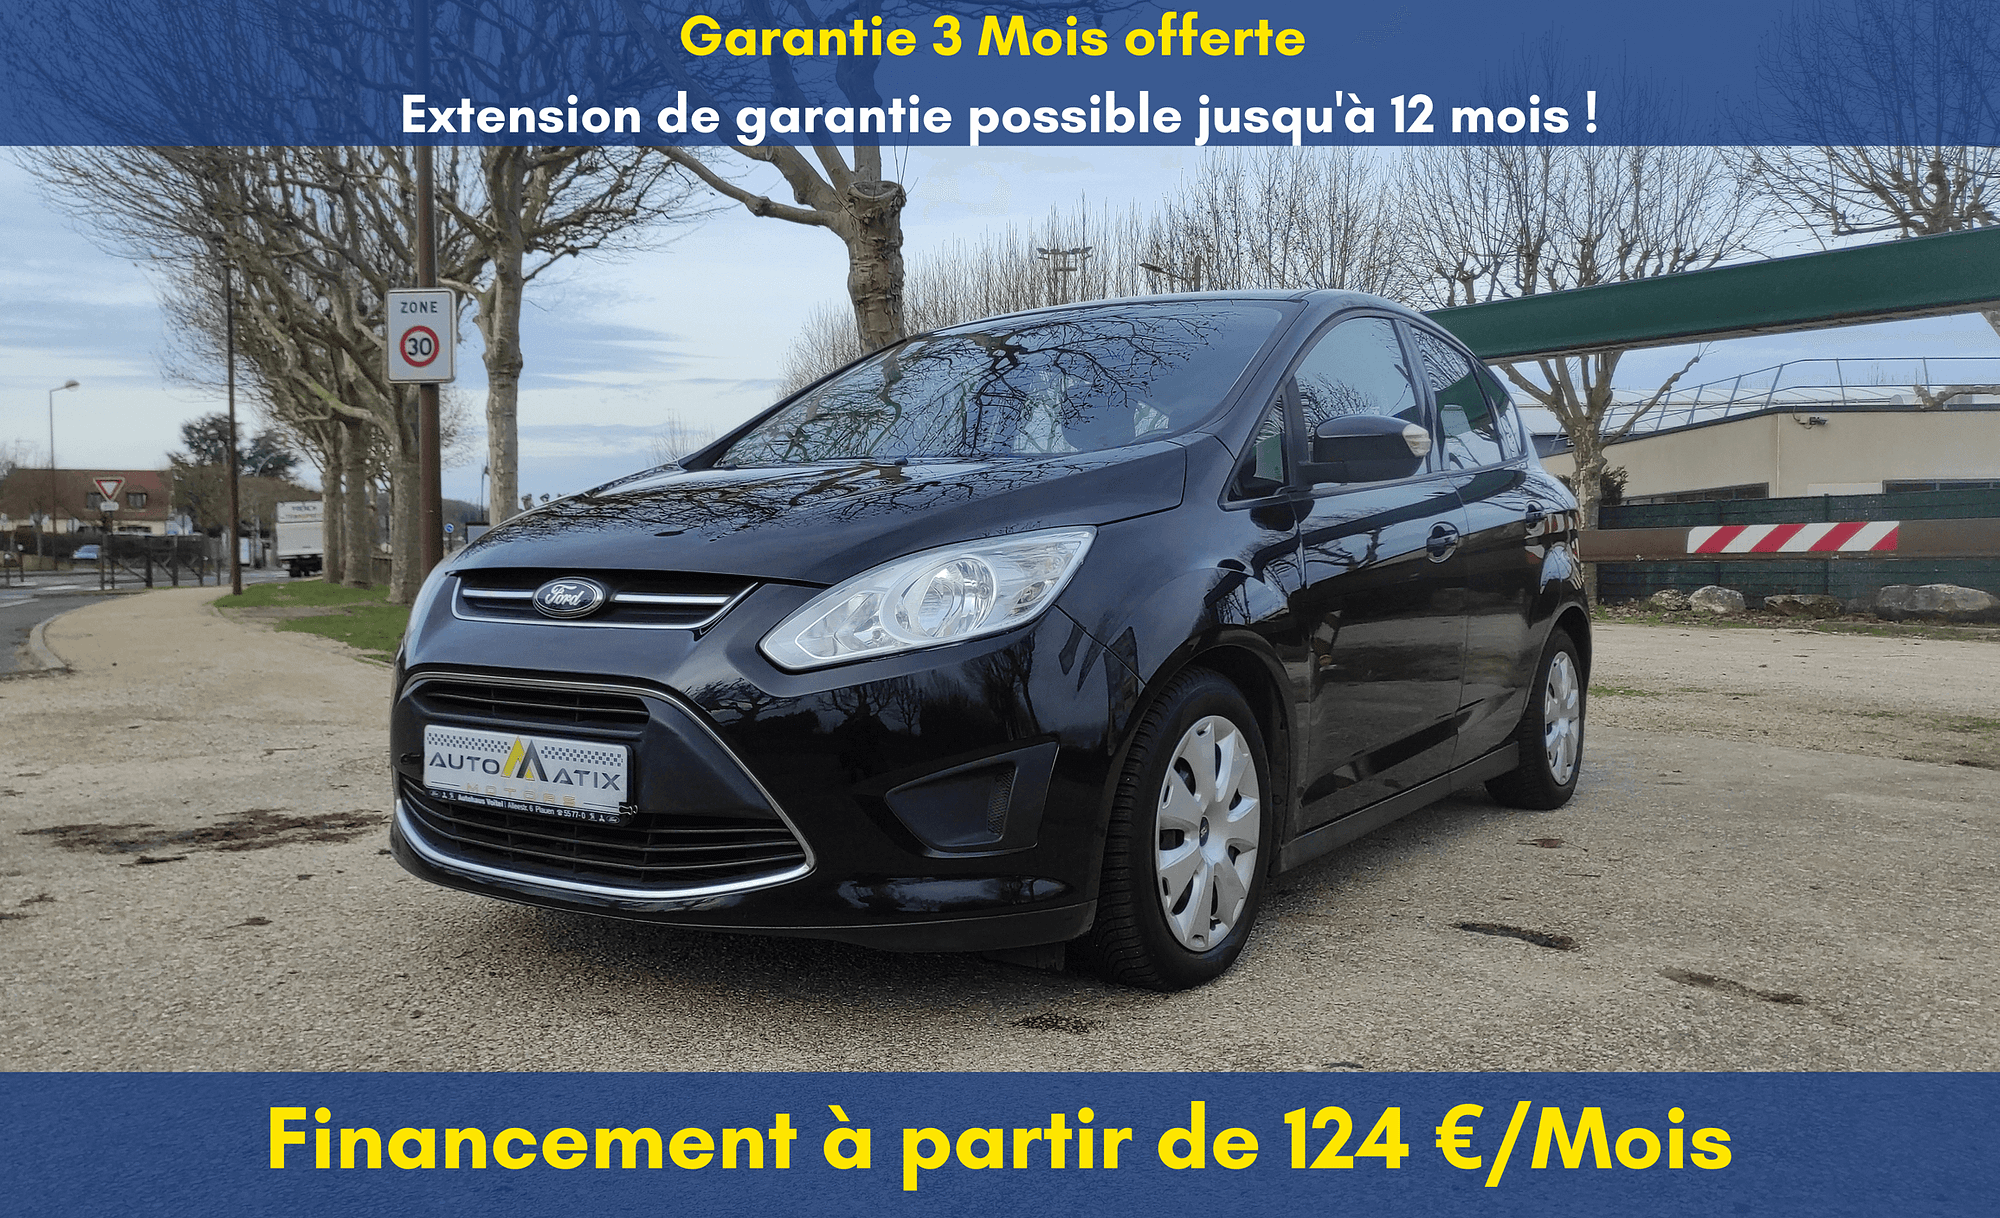 FORD C MAX II 2014 1.0 ECOBOOST 125 S&S EDITION - Automatix Motors - Voiture Occasion - Achat Voiture - Vente Voiture - Reprise Voiture